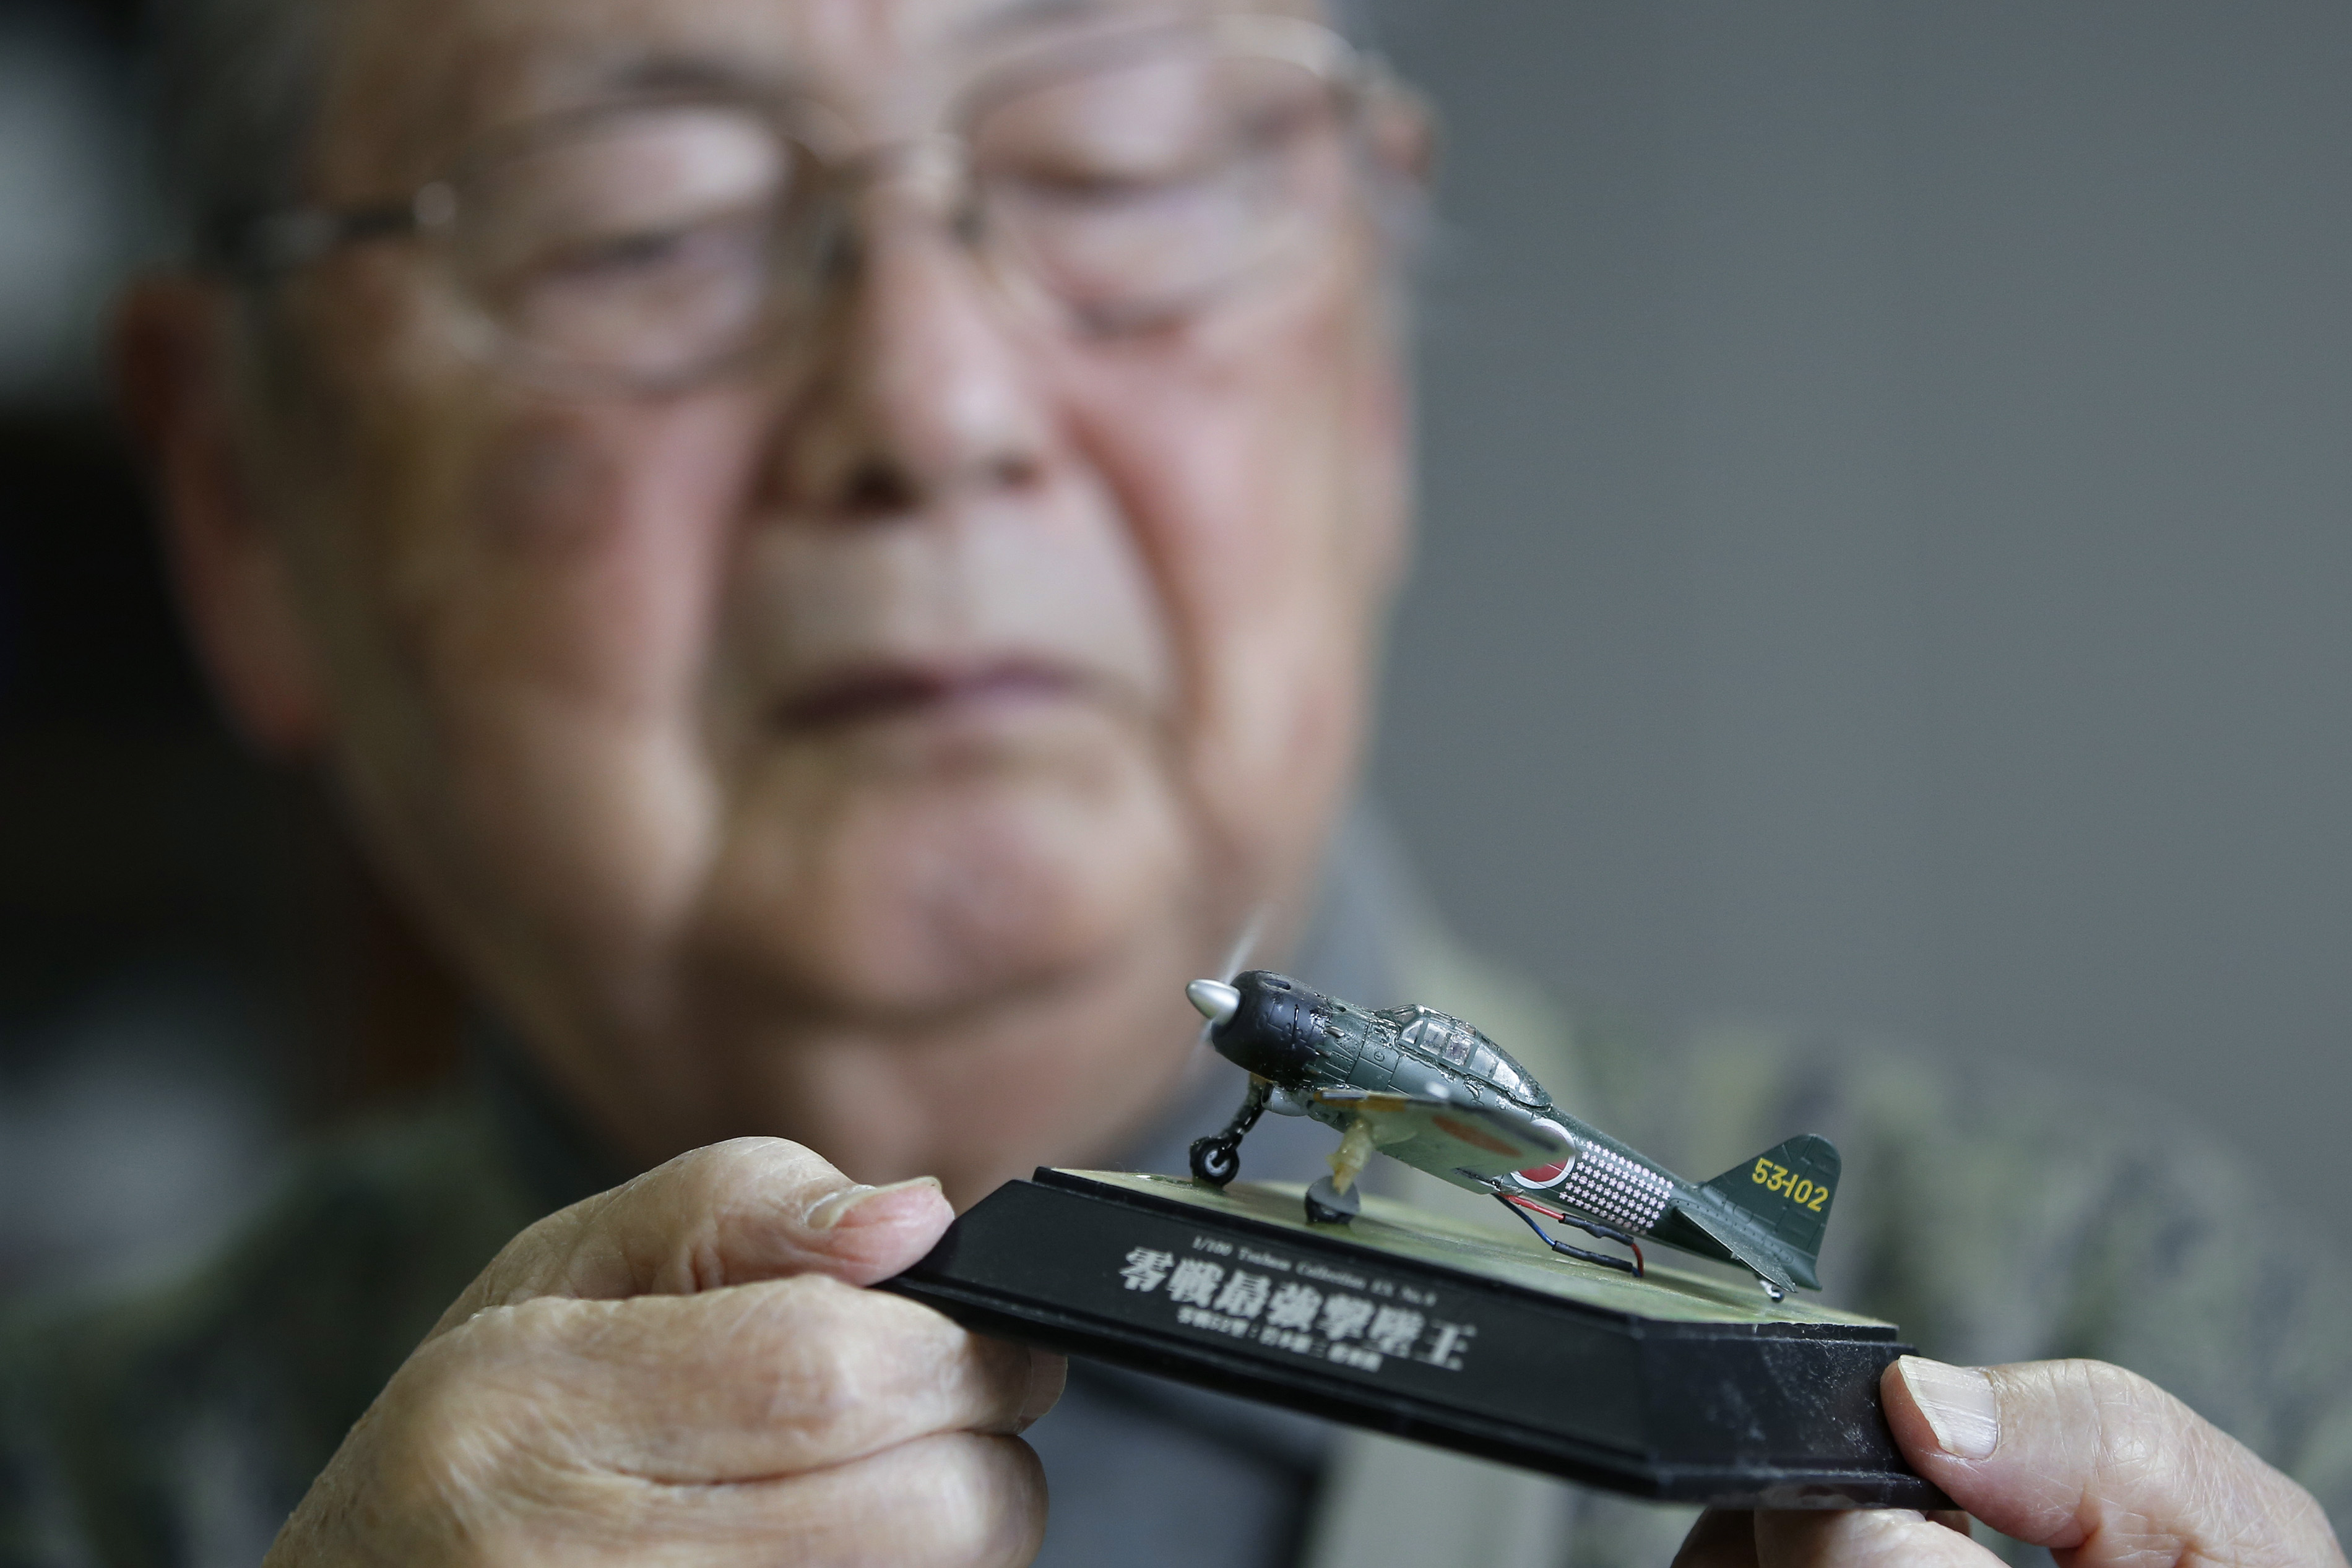 Hisashi Tezuka, a former kamikaze pilot, holds a 1/100-scale plastic model he built of the Type-52 Zero fighter, during an interview at his home in Yokohama on Feb. 19. | BLOOMBERG